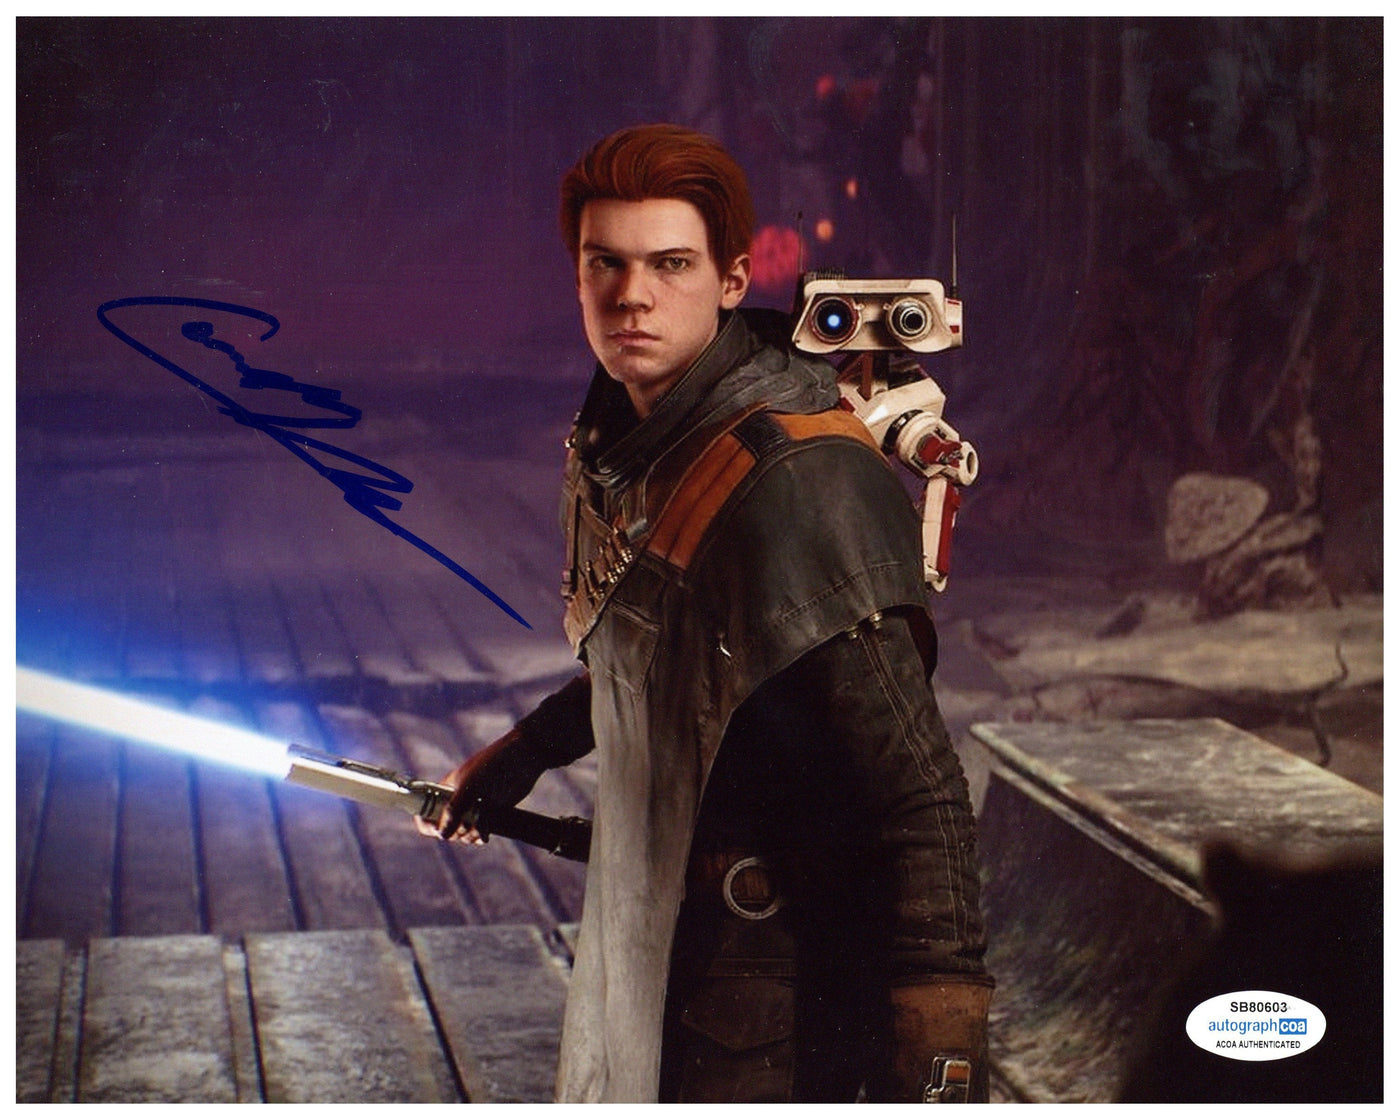 CAMERON MONAGHAN SIGNED 8X10 PHOTO STAR WARS JEDI FALLEN ORDER AUTOGRAPHED ACOA 2